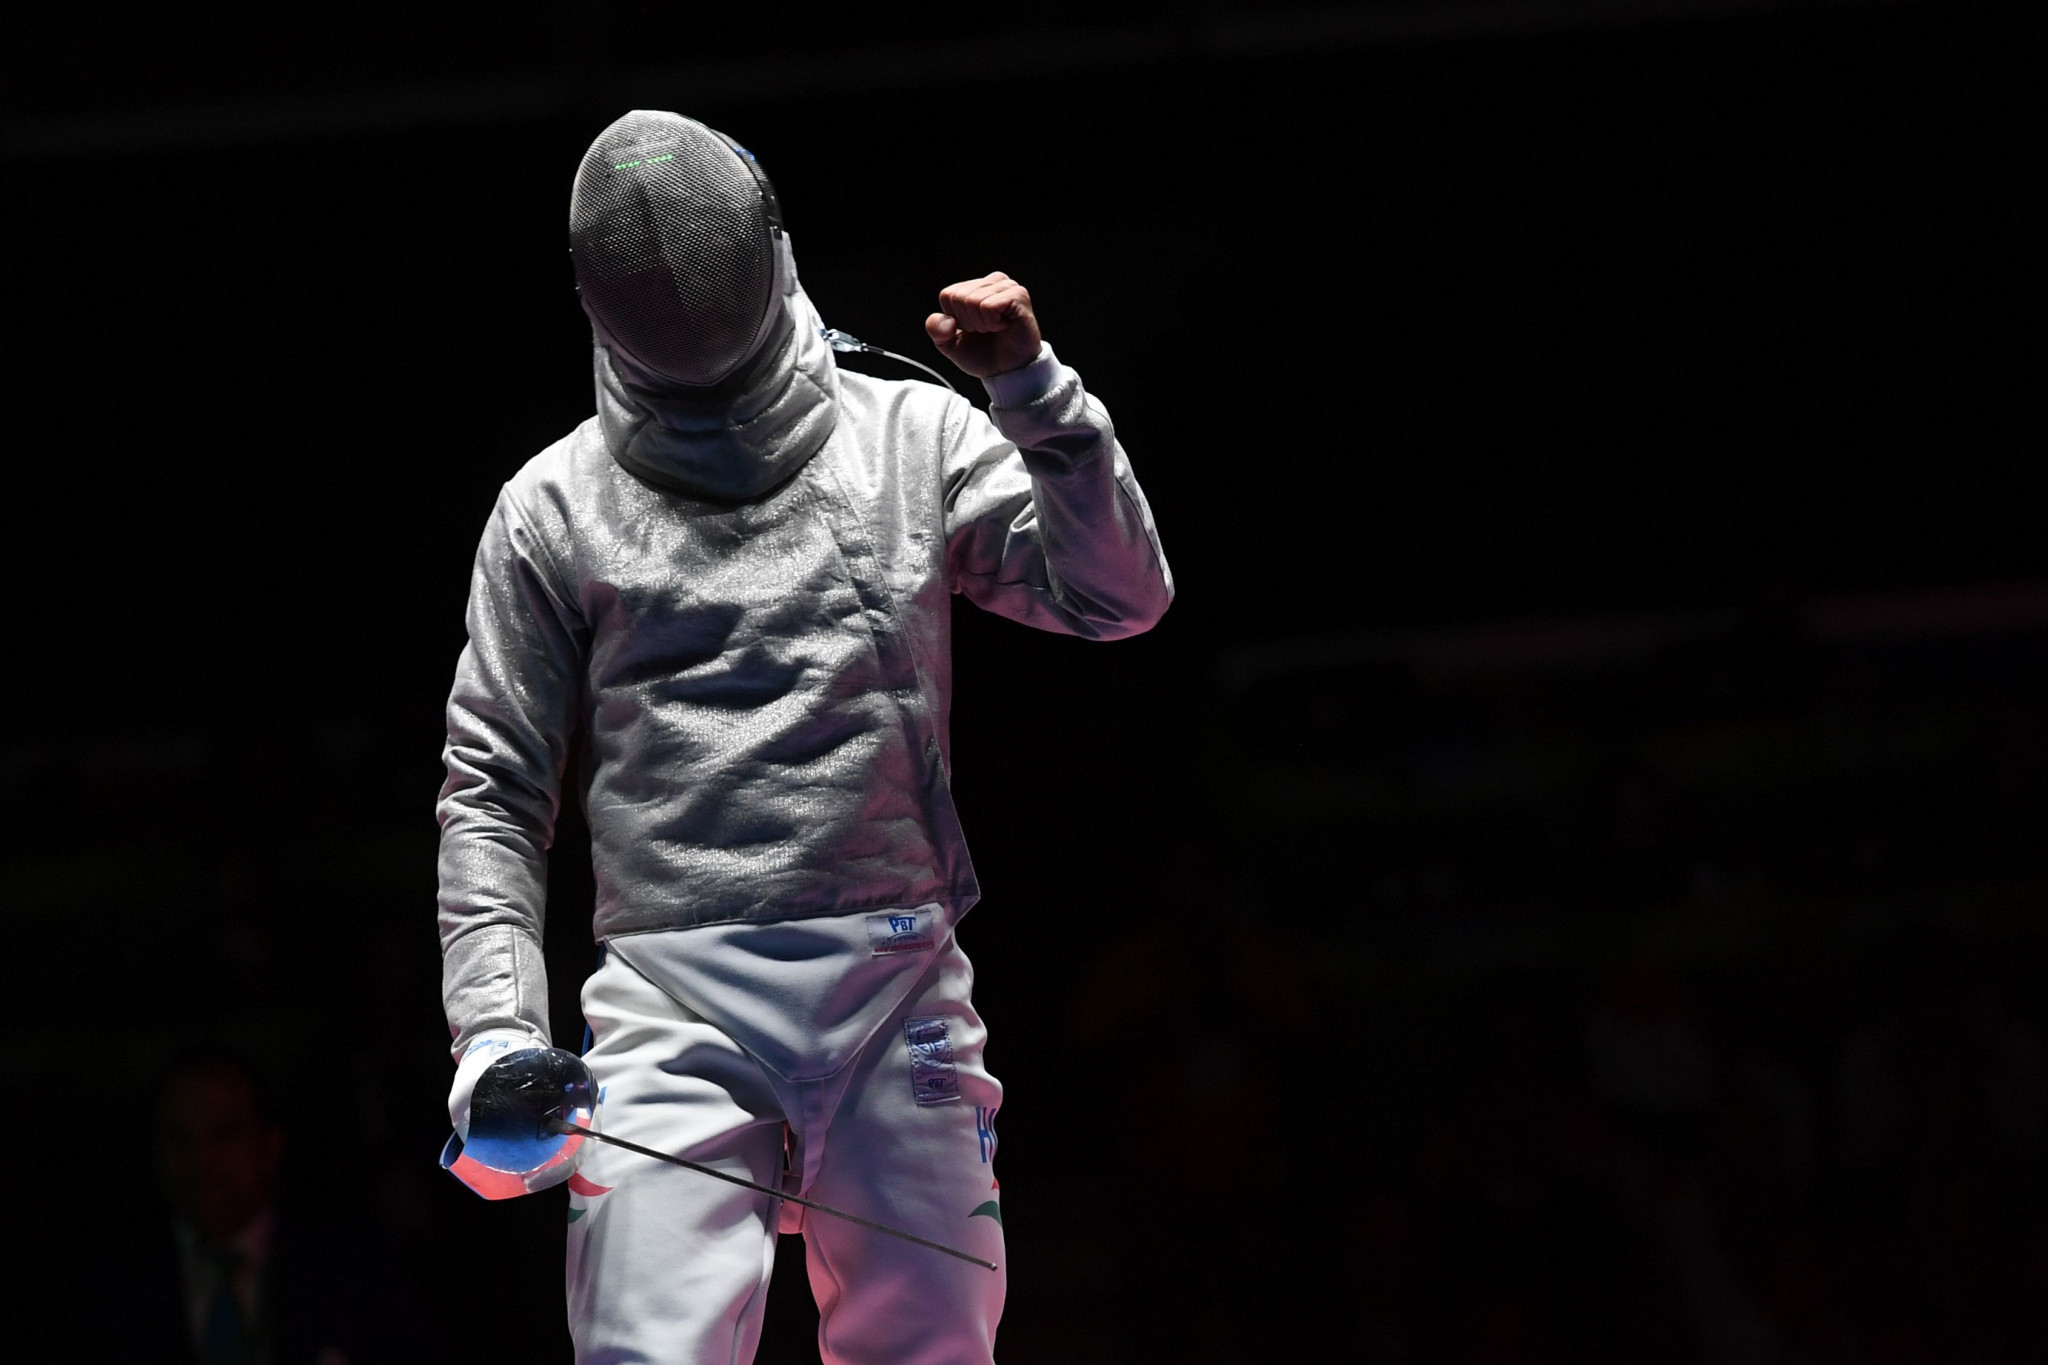 Szilágyi to carry Hungarian hopes at World Fencing Championships in Budapest